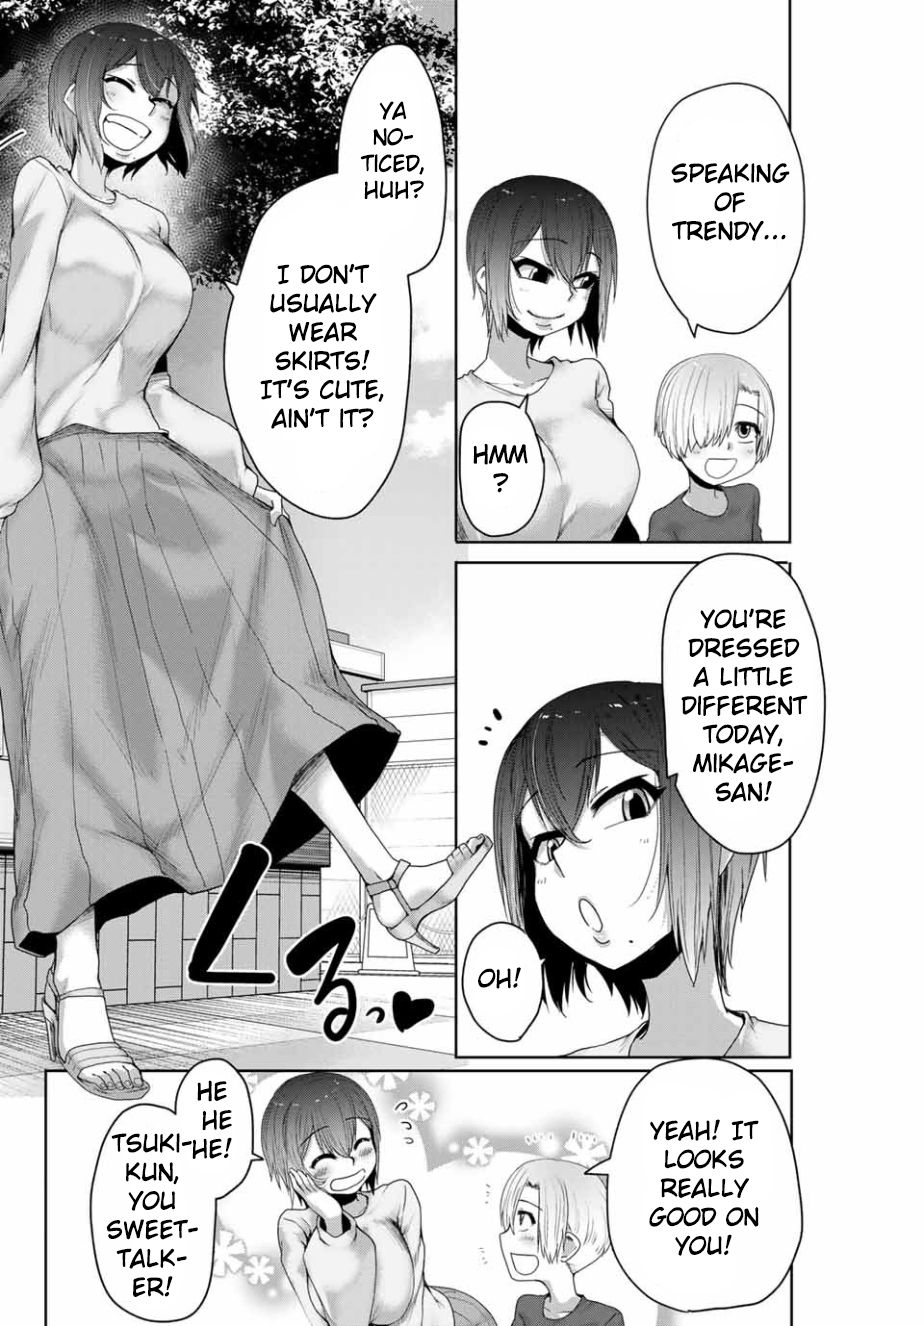 The Girl With A Kansai Accent And The Pure Boy - chapter 13 - #2